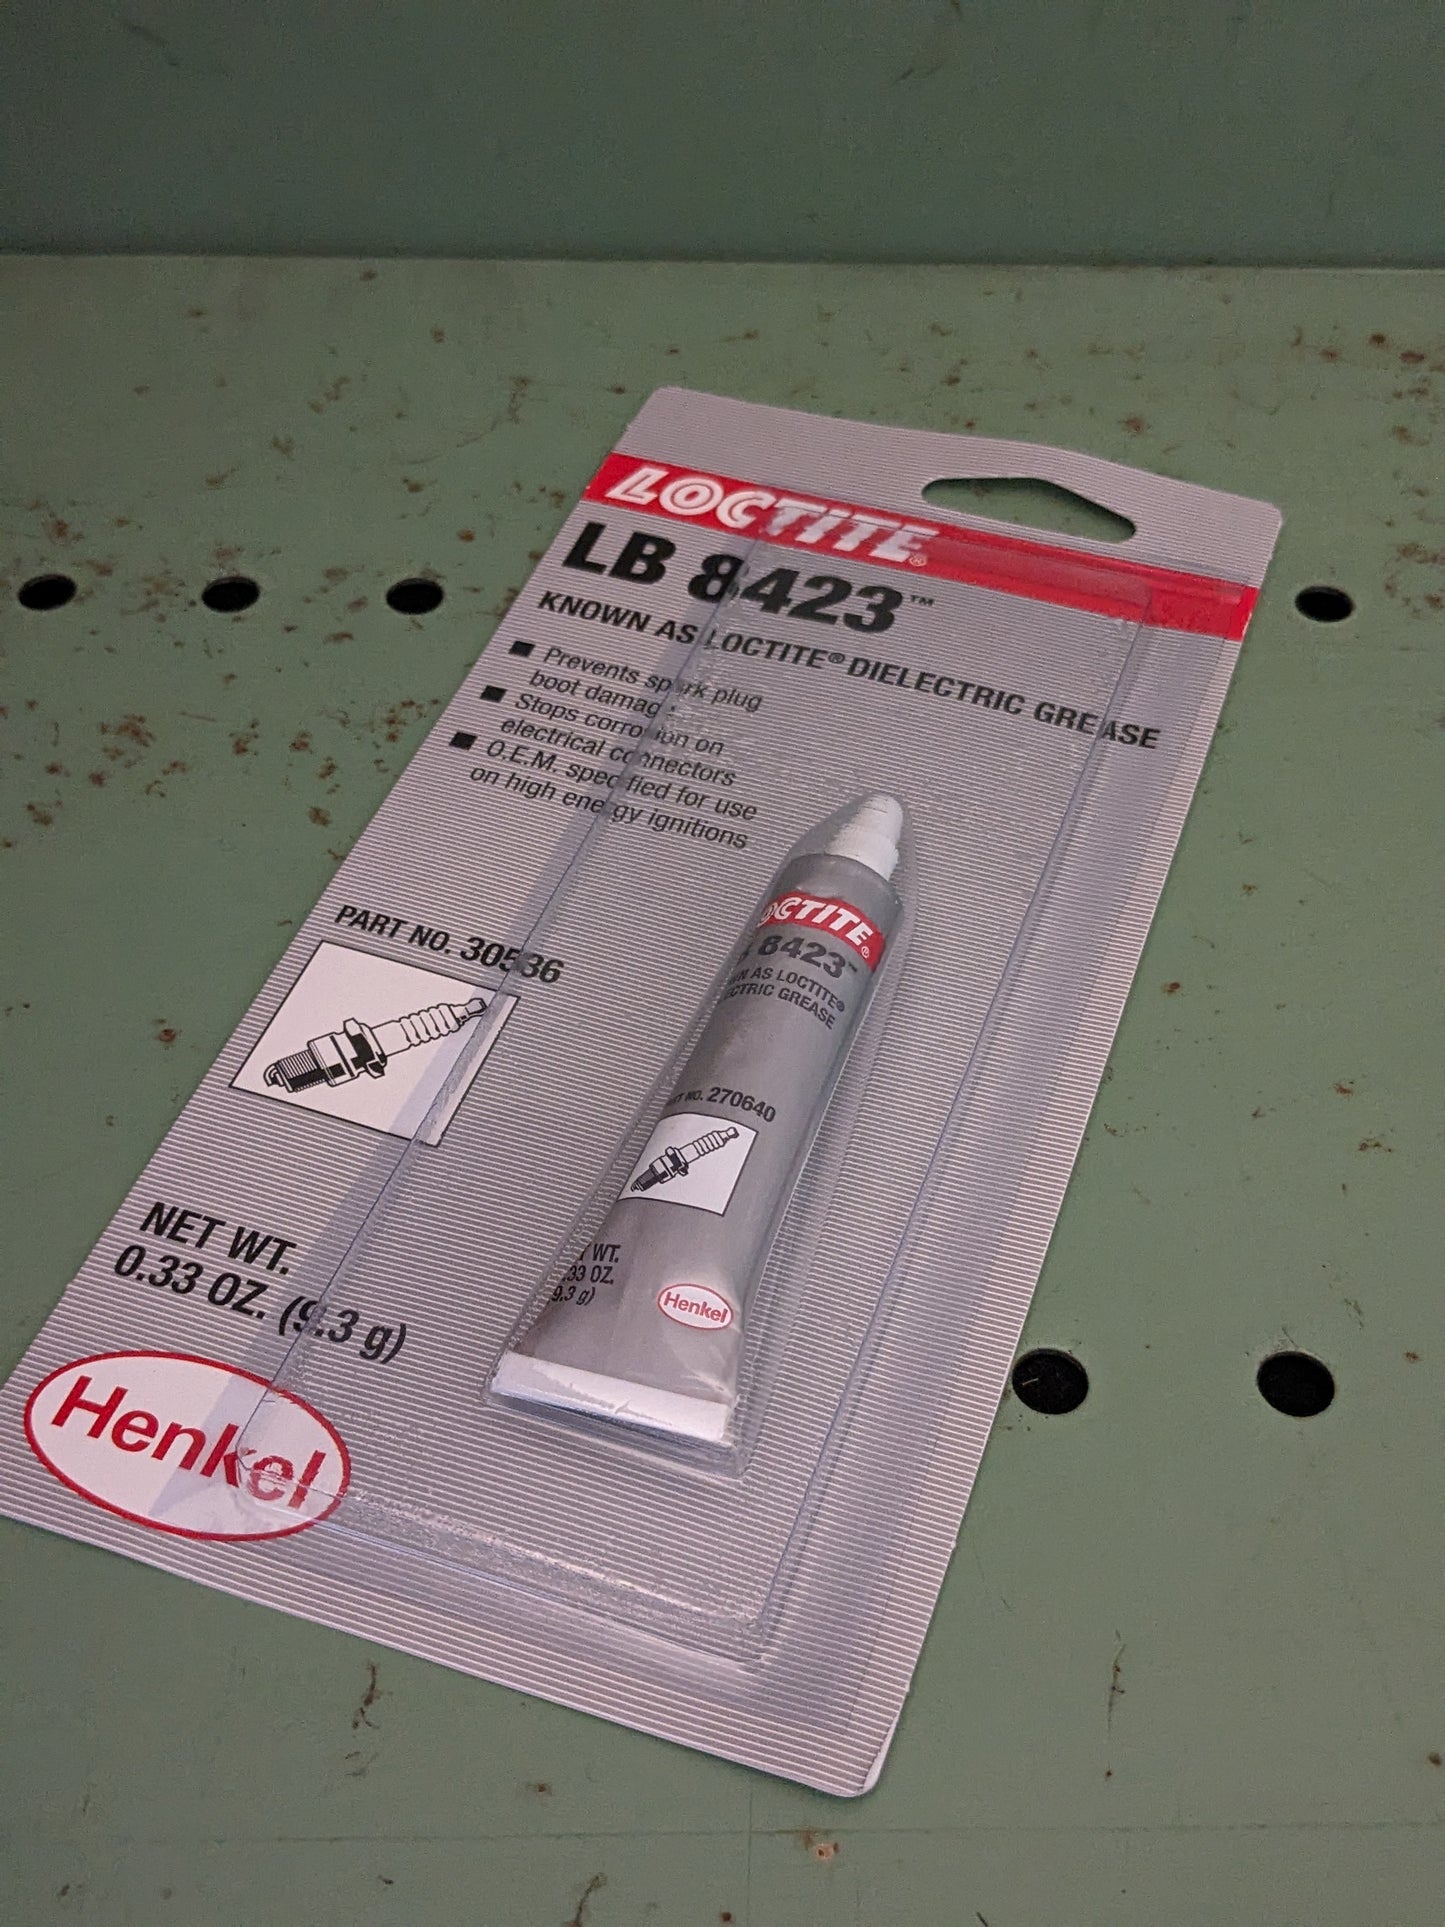 Loctite Dielectric Grease